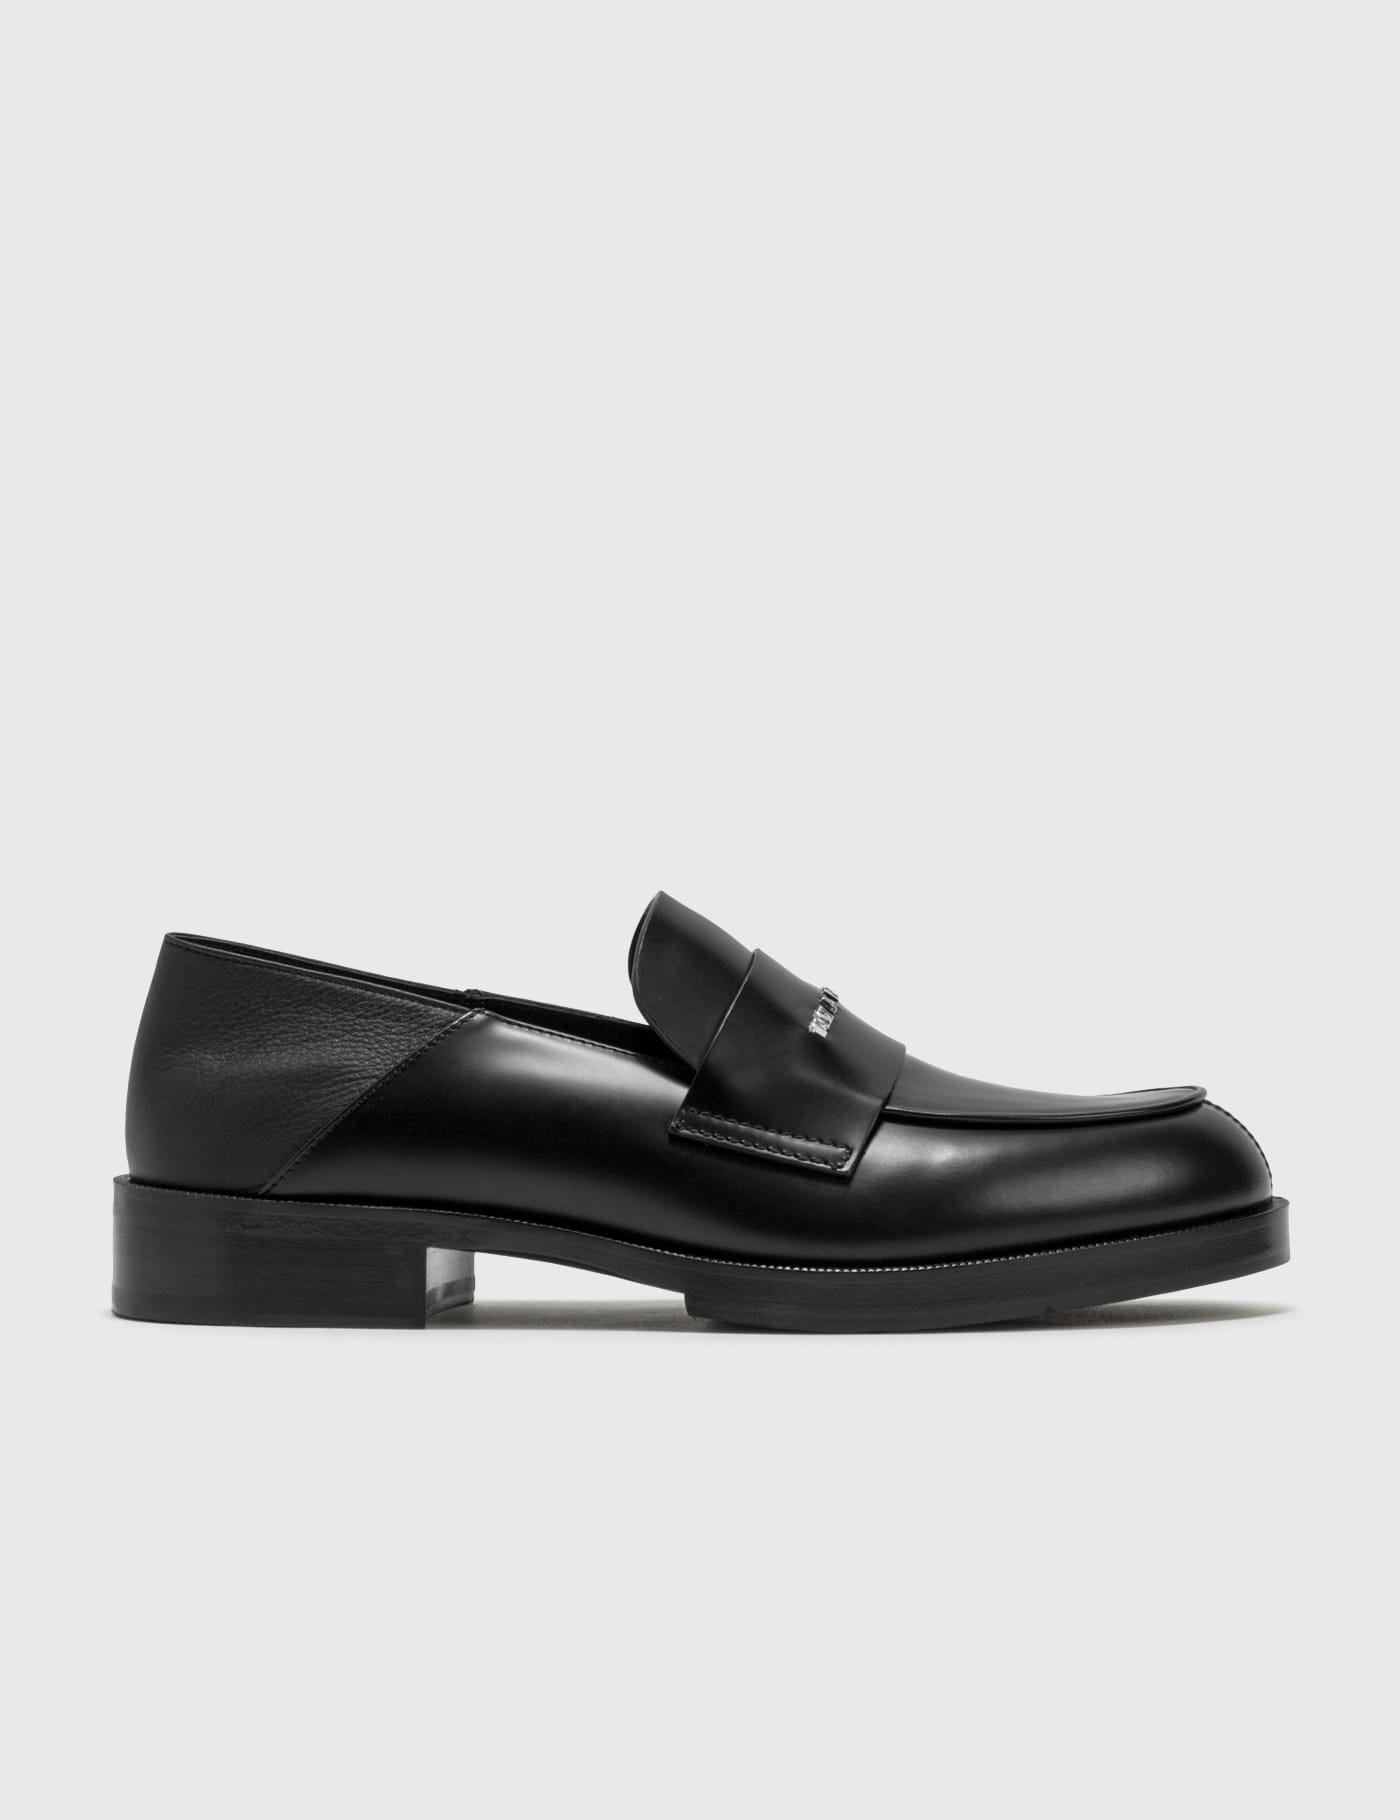 1017 ALYX 9SM - Slip On Loafer | HBX - Globally Curated Fashion 